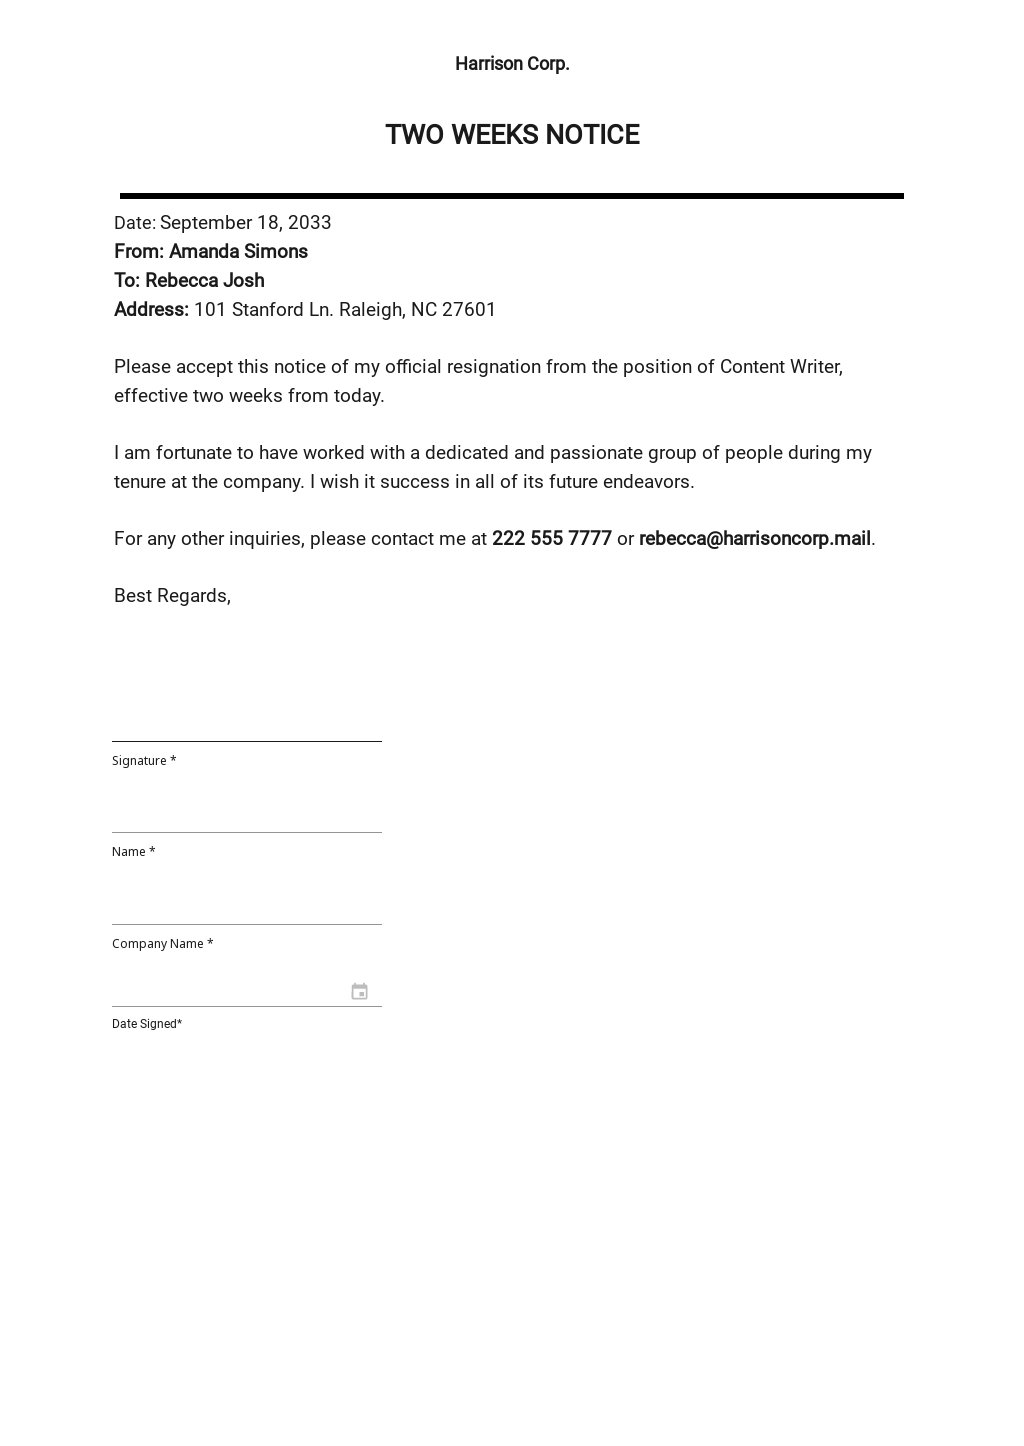 12 free two weeks notice letter templates edit download templatenet